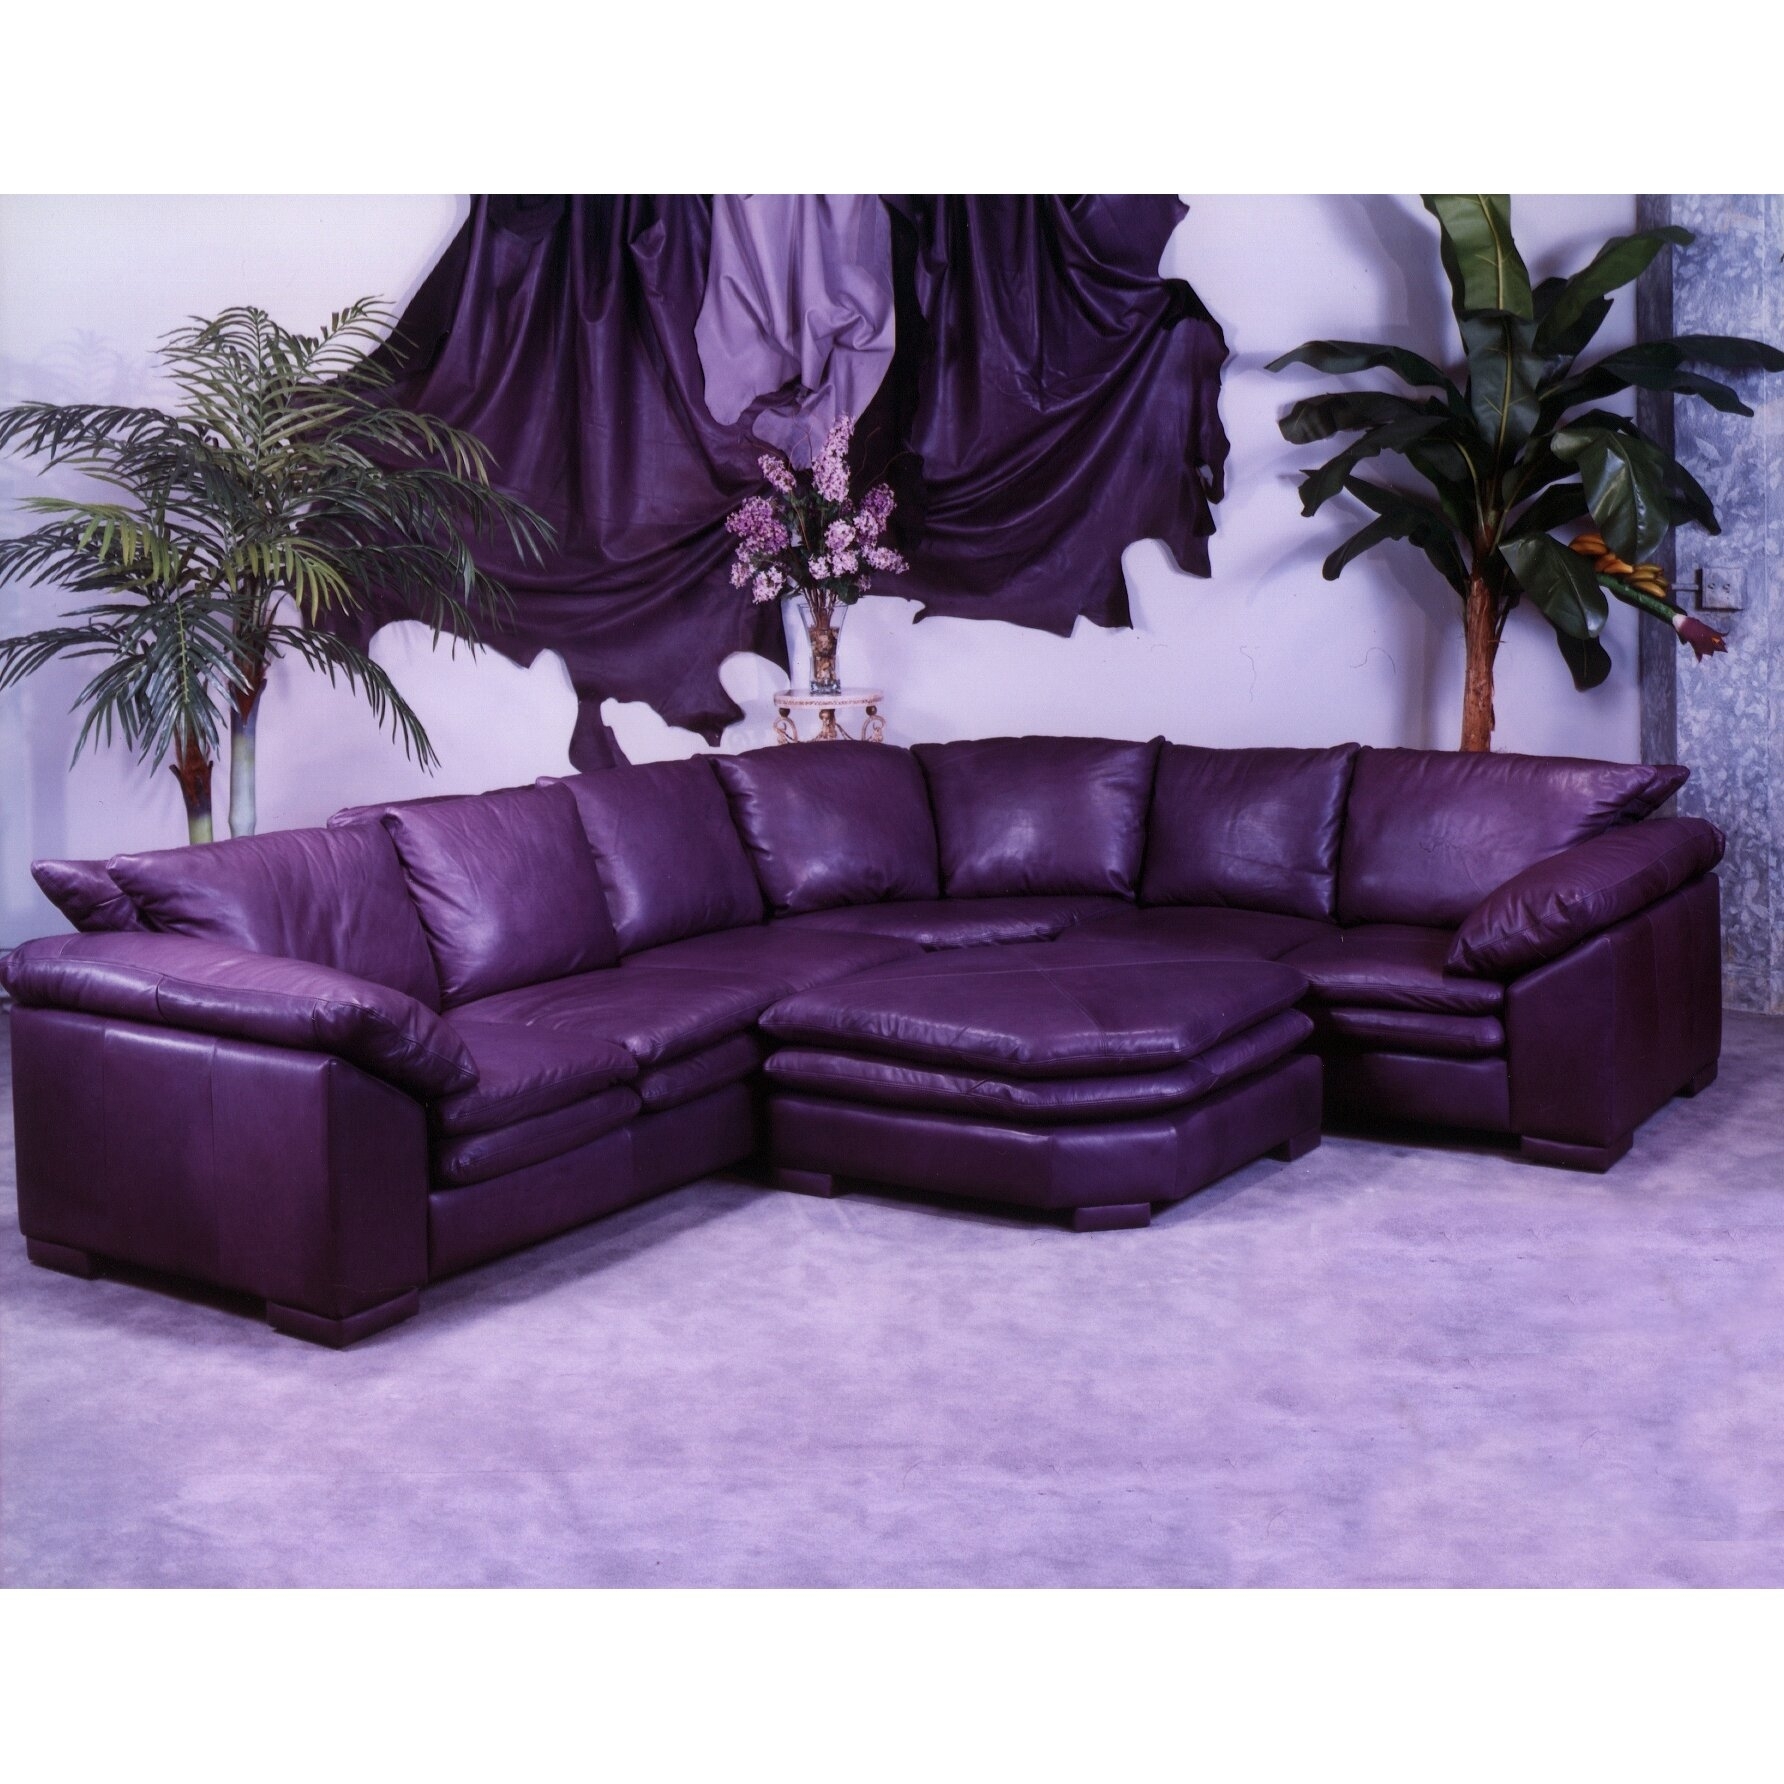 Purple Leather Sectional Ideas on Foter